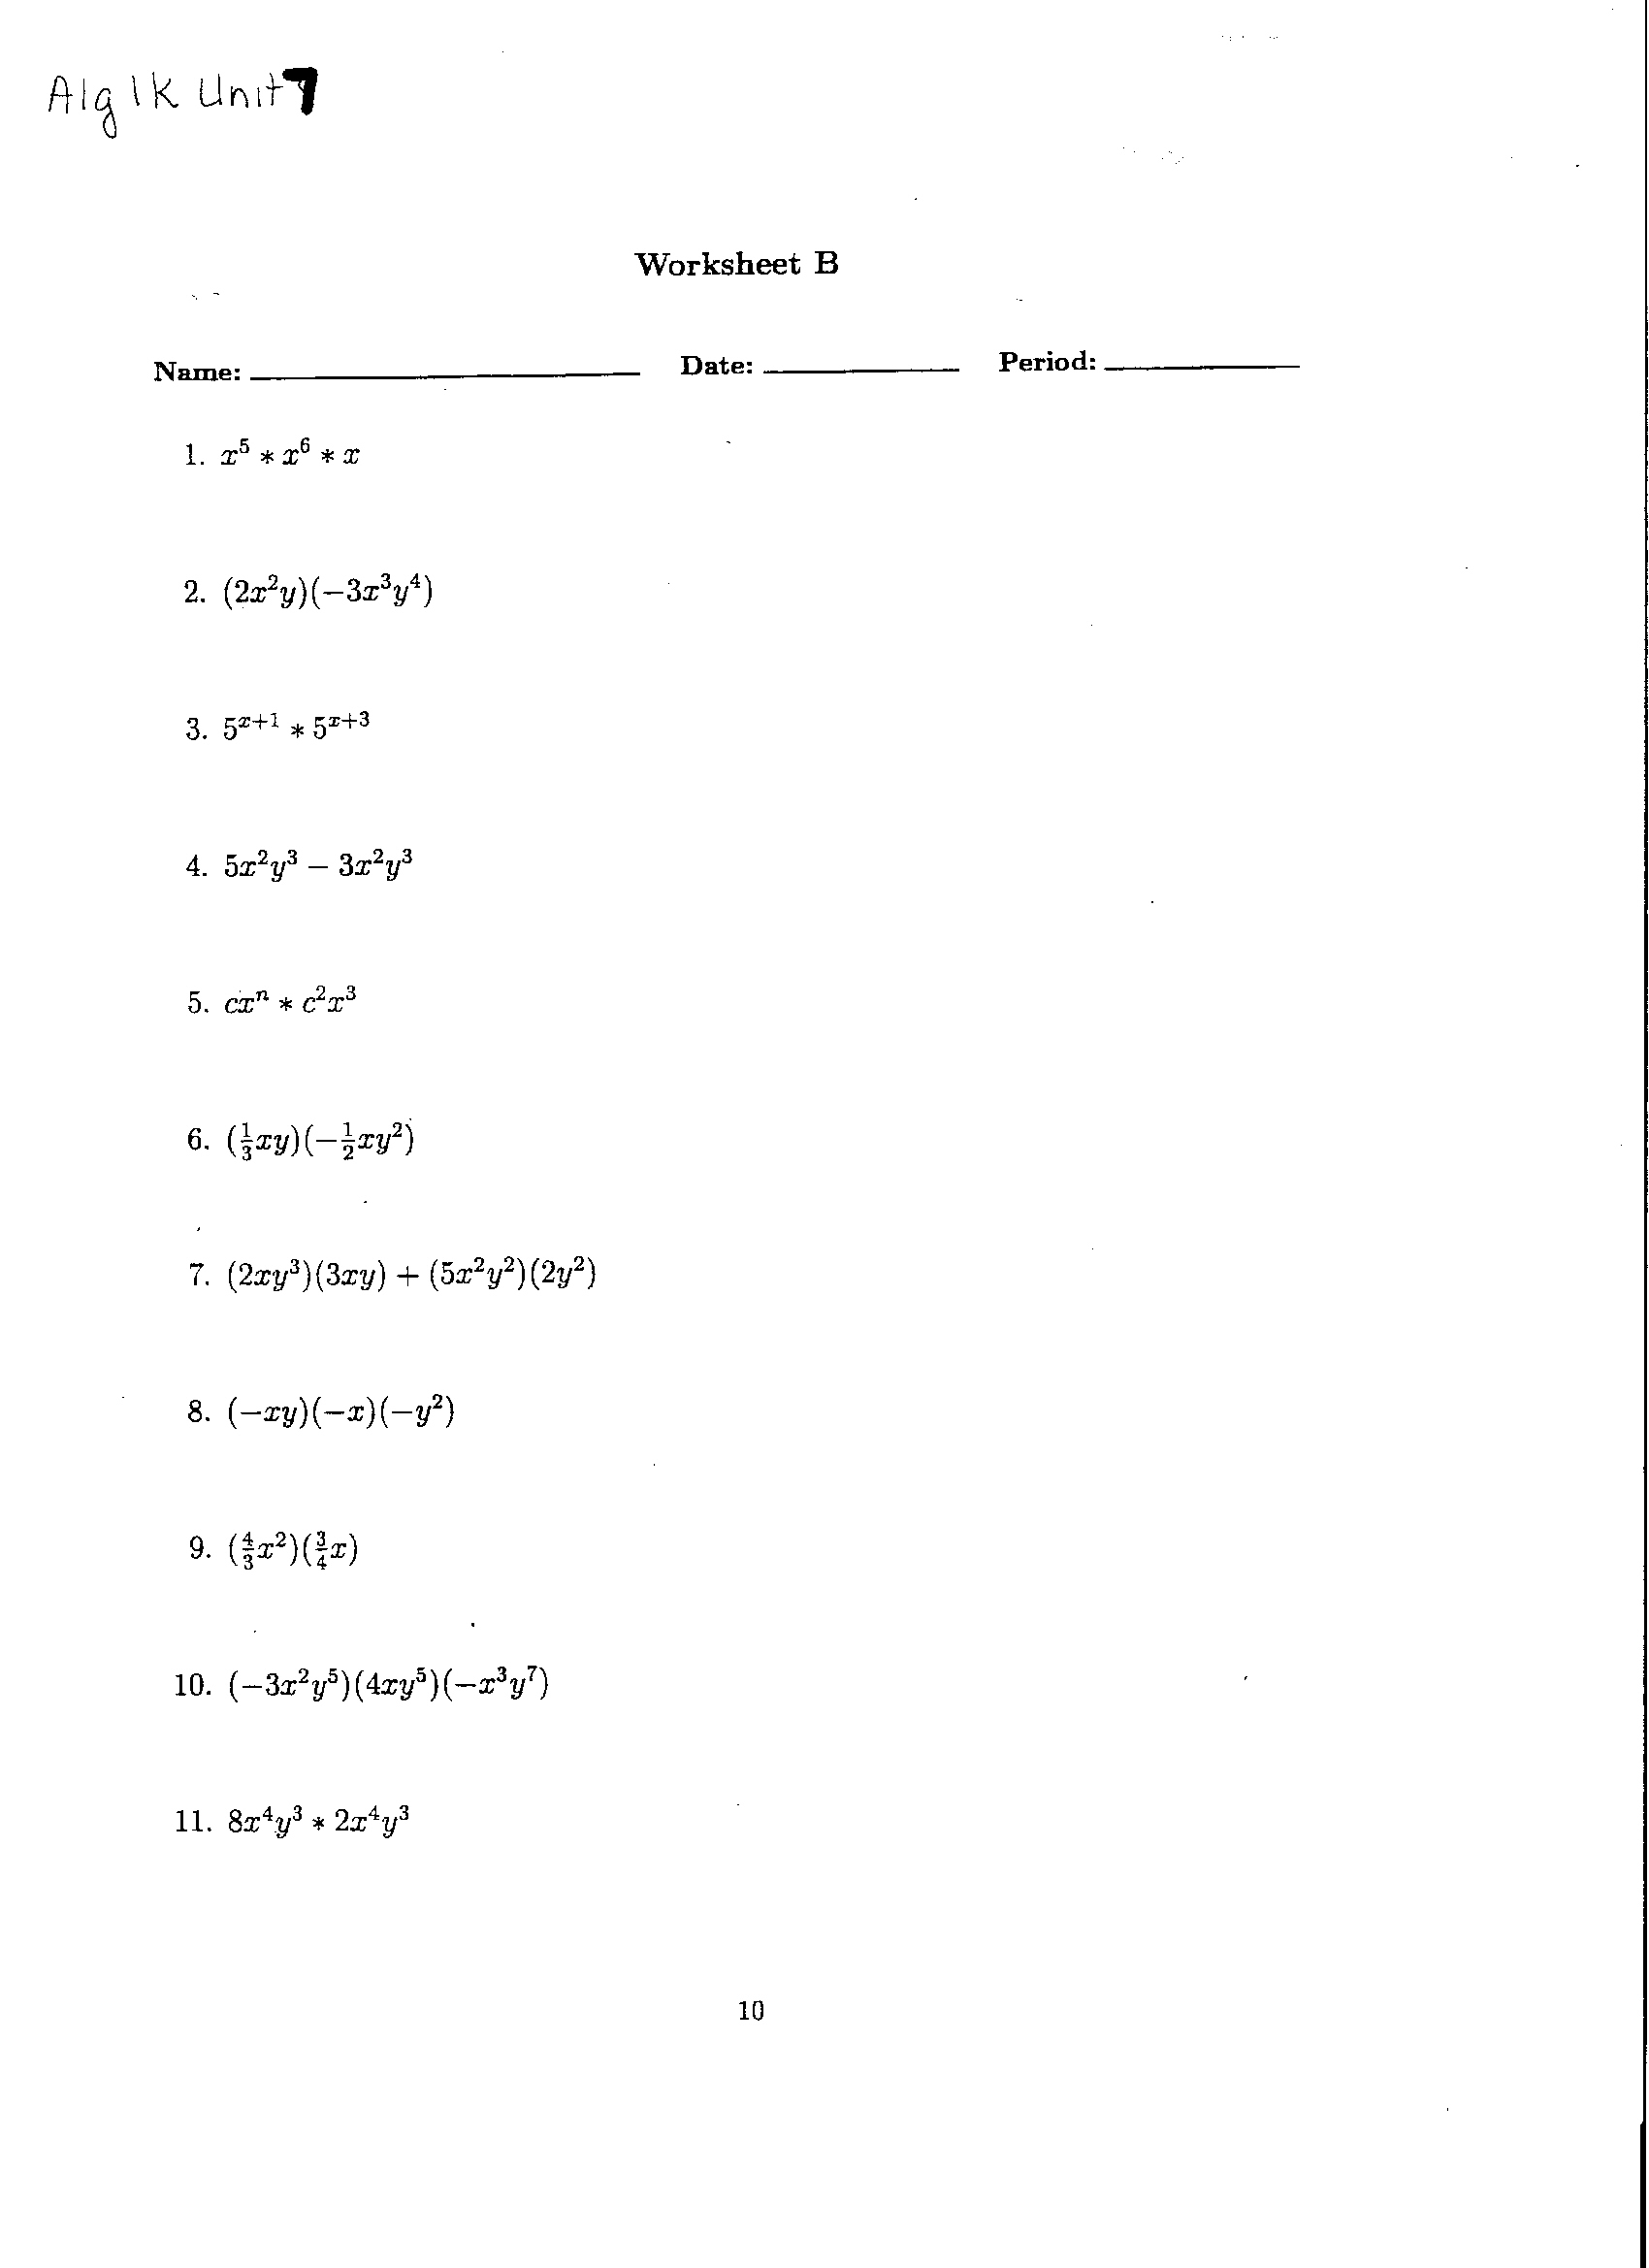 17 Best Images of Introduction To PreAlgebra Worksheets  Printable PreAlgebra Worksheets 